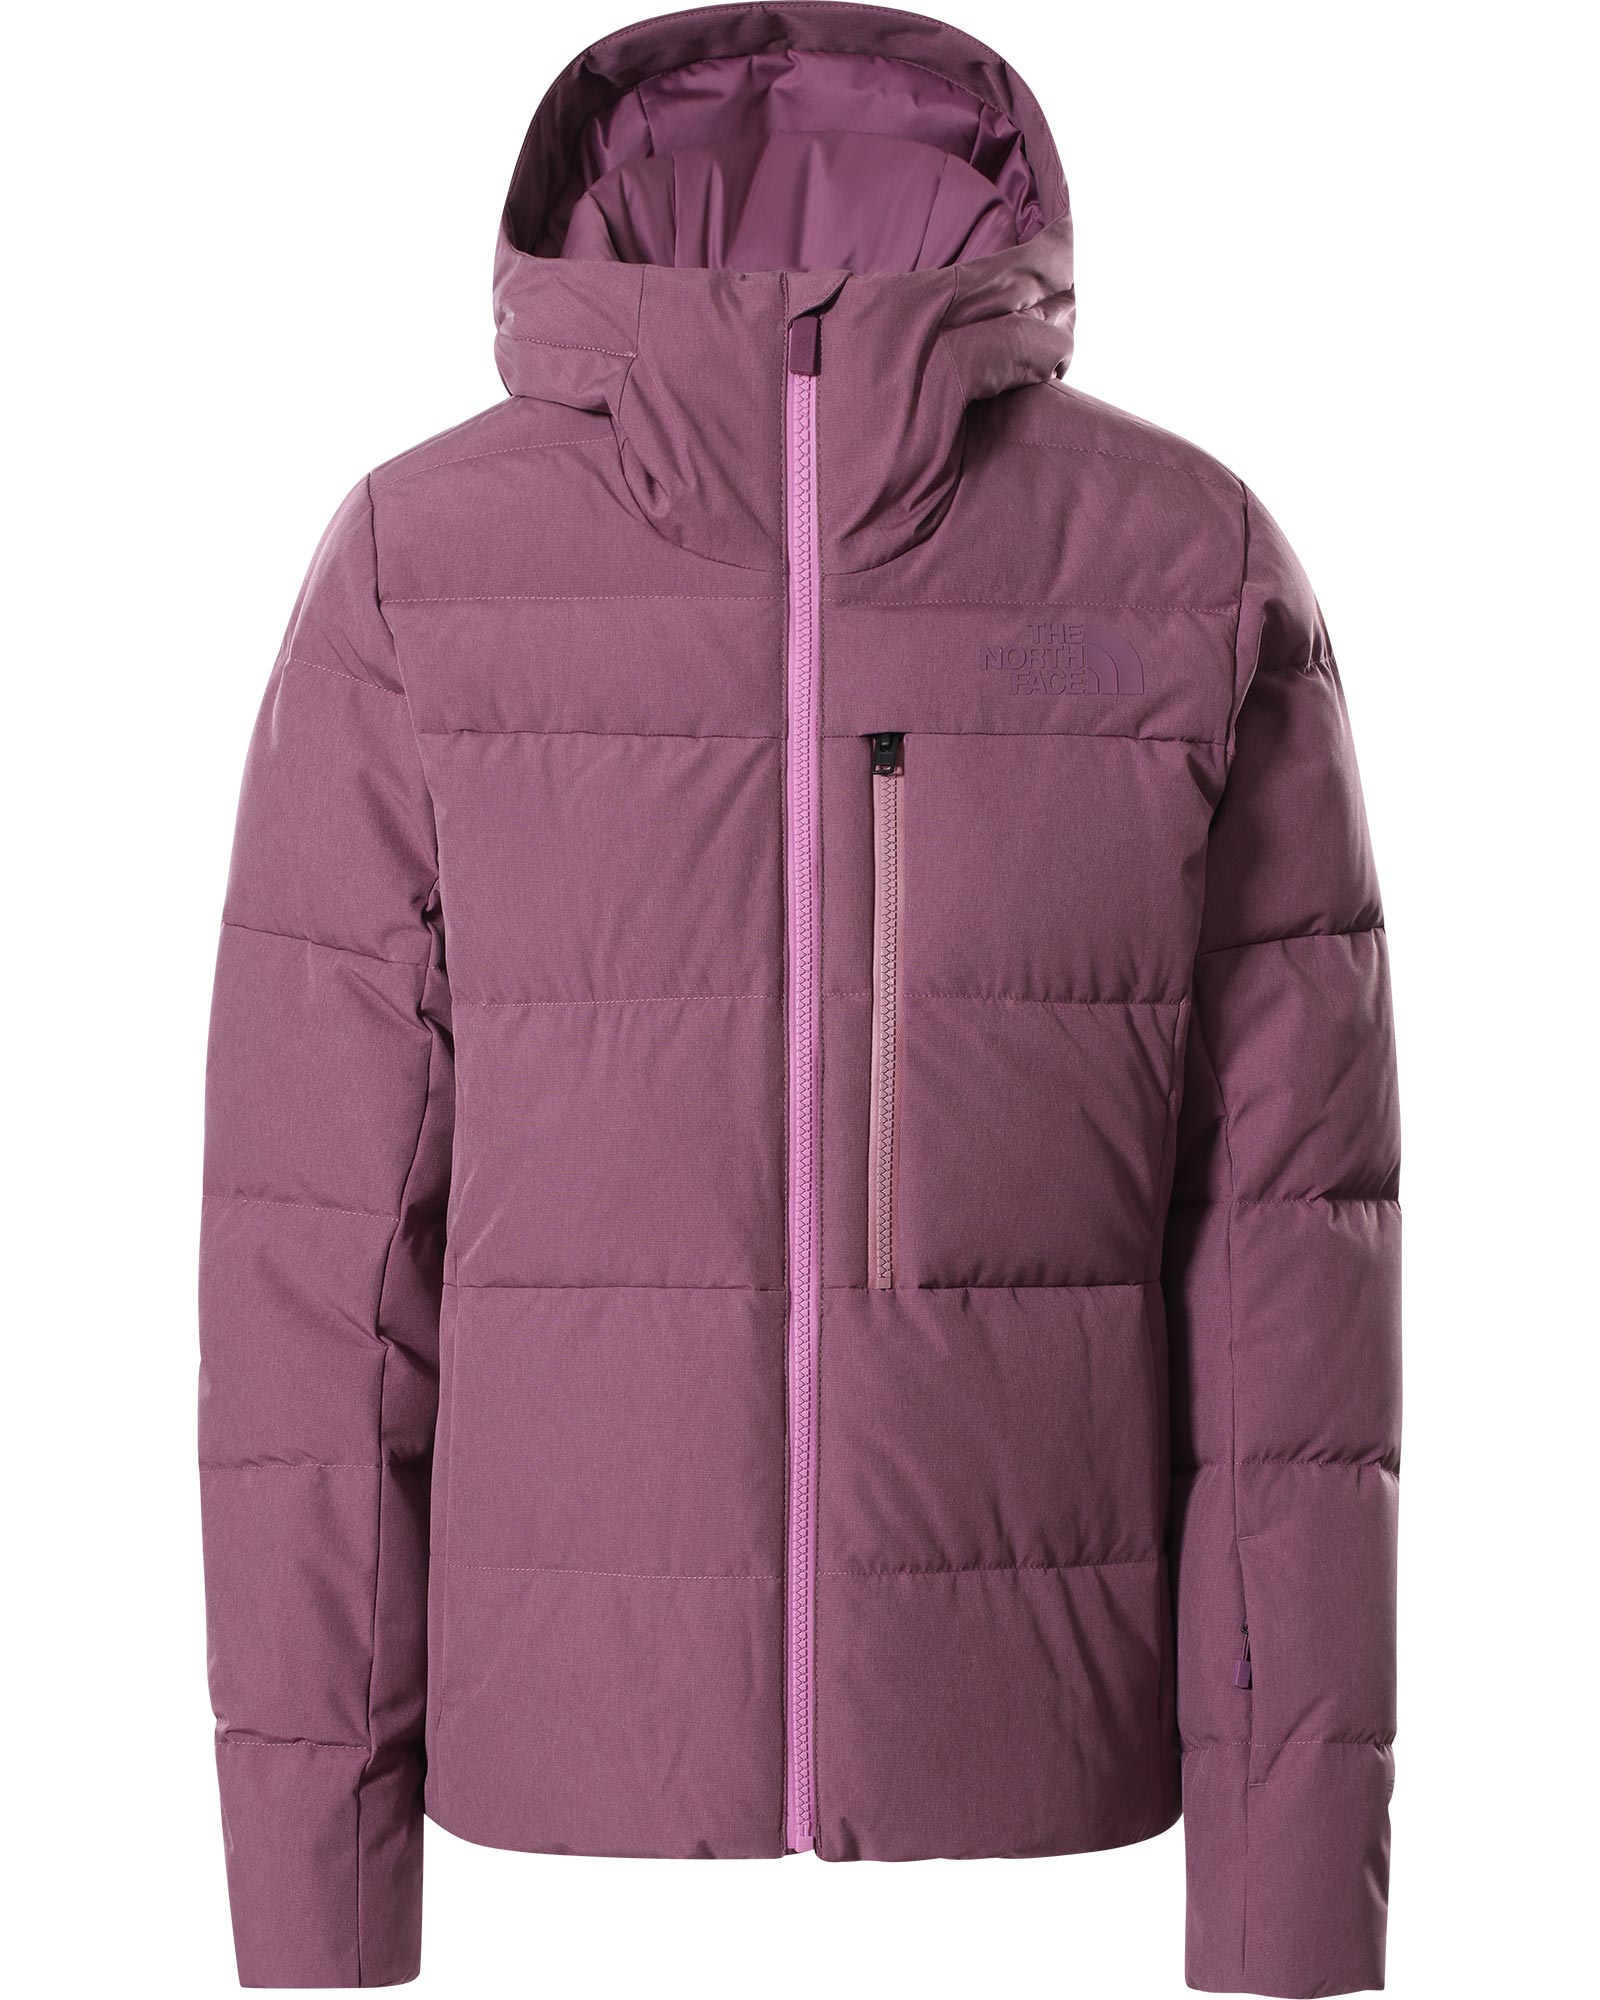 The North Face Heavenly Down Women’s Jacket - Pikes Purple Heather XS